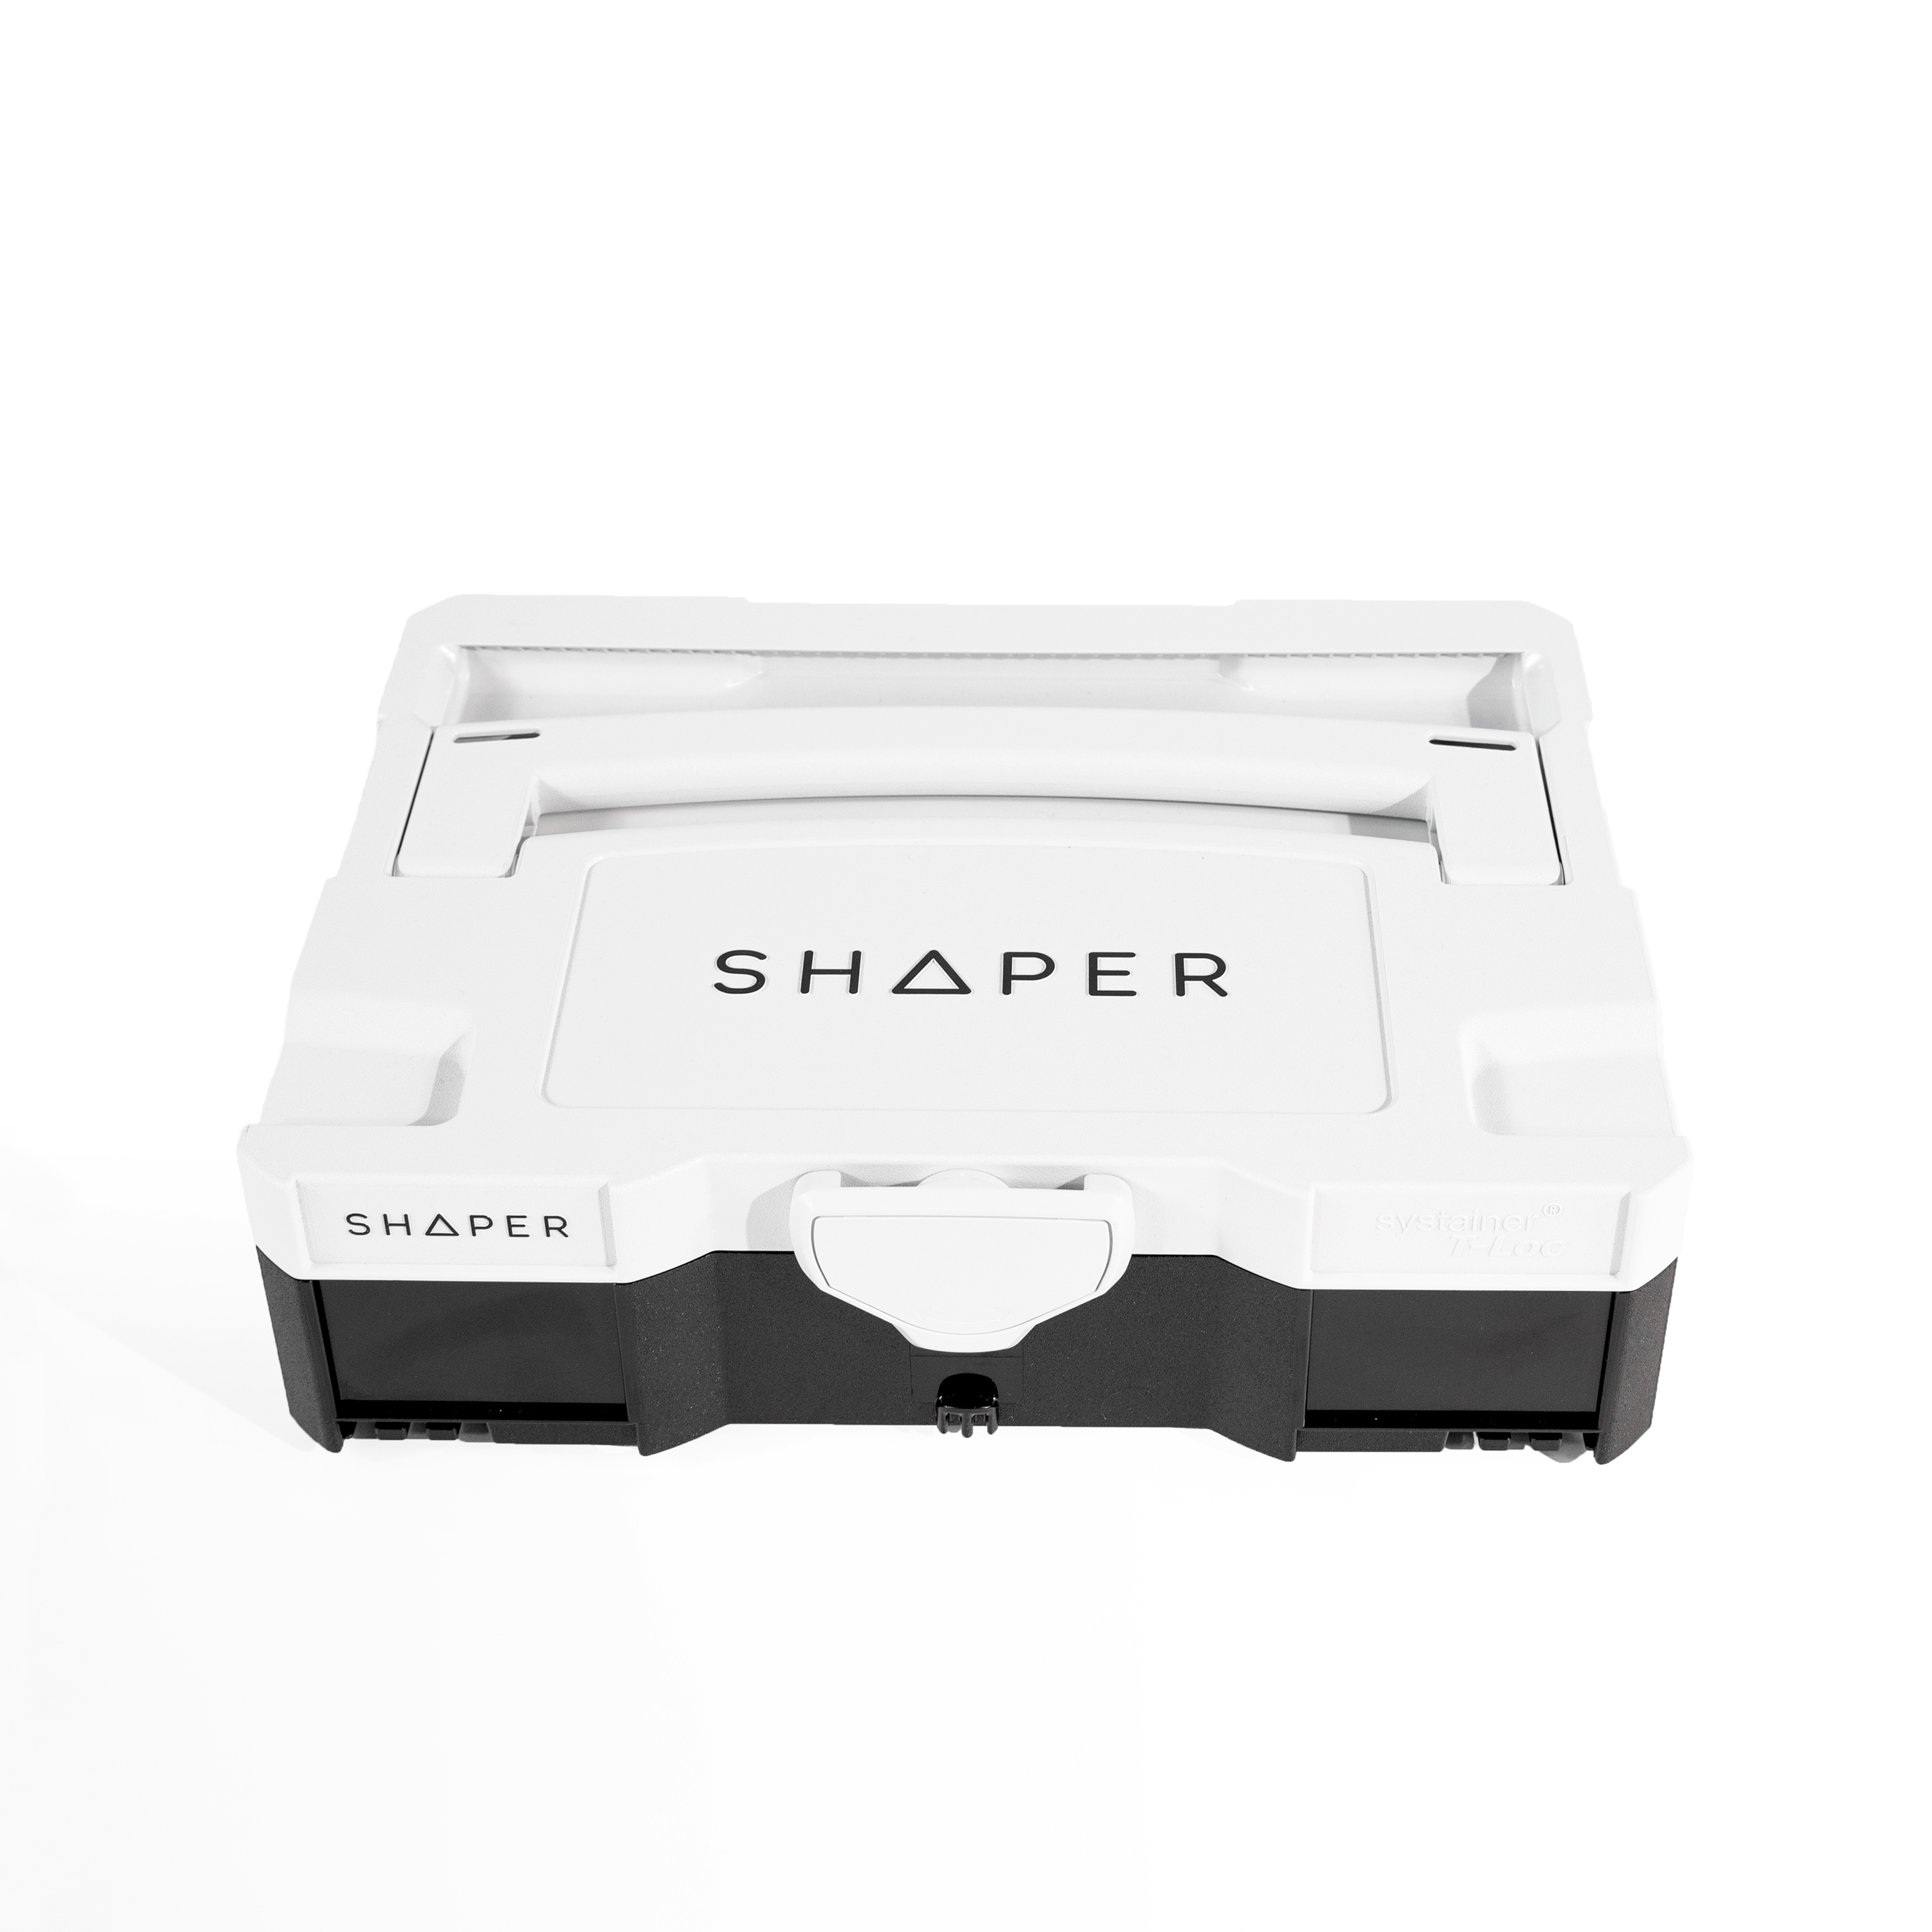 Shaper SYS 1 - Individuell anpassbar